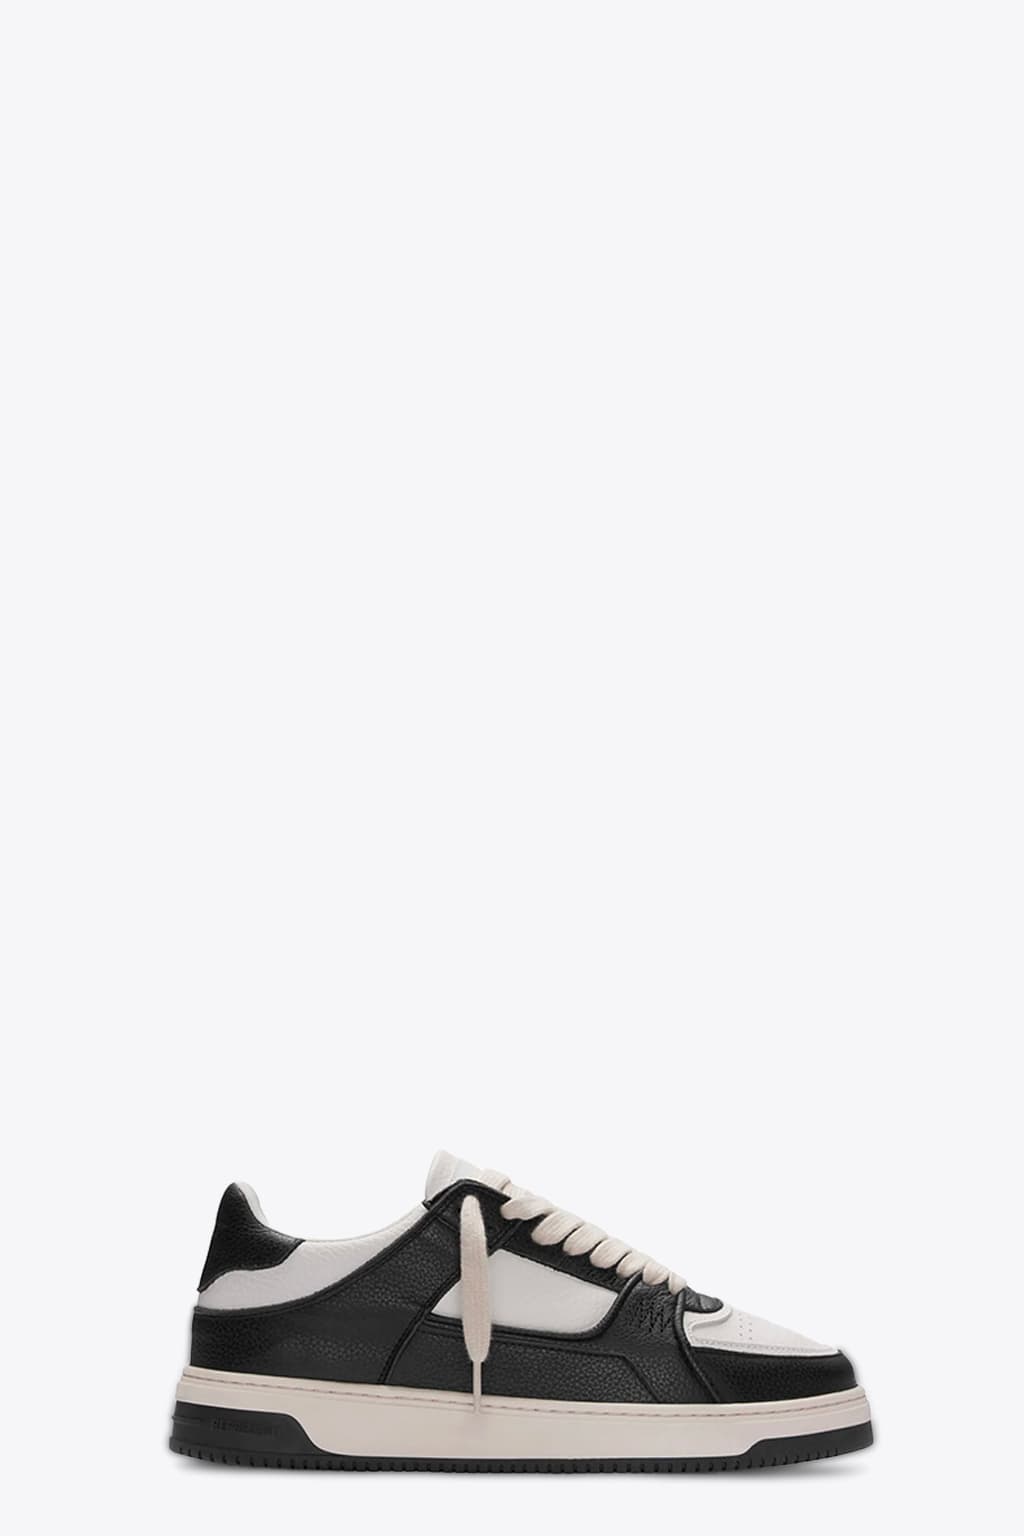 Shop Represent Apex Off White And Black Leather Low Top Sneaker - Apex